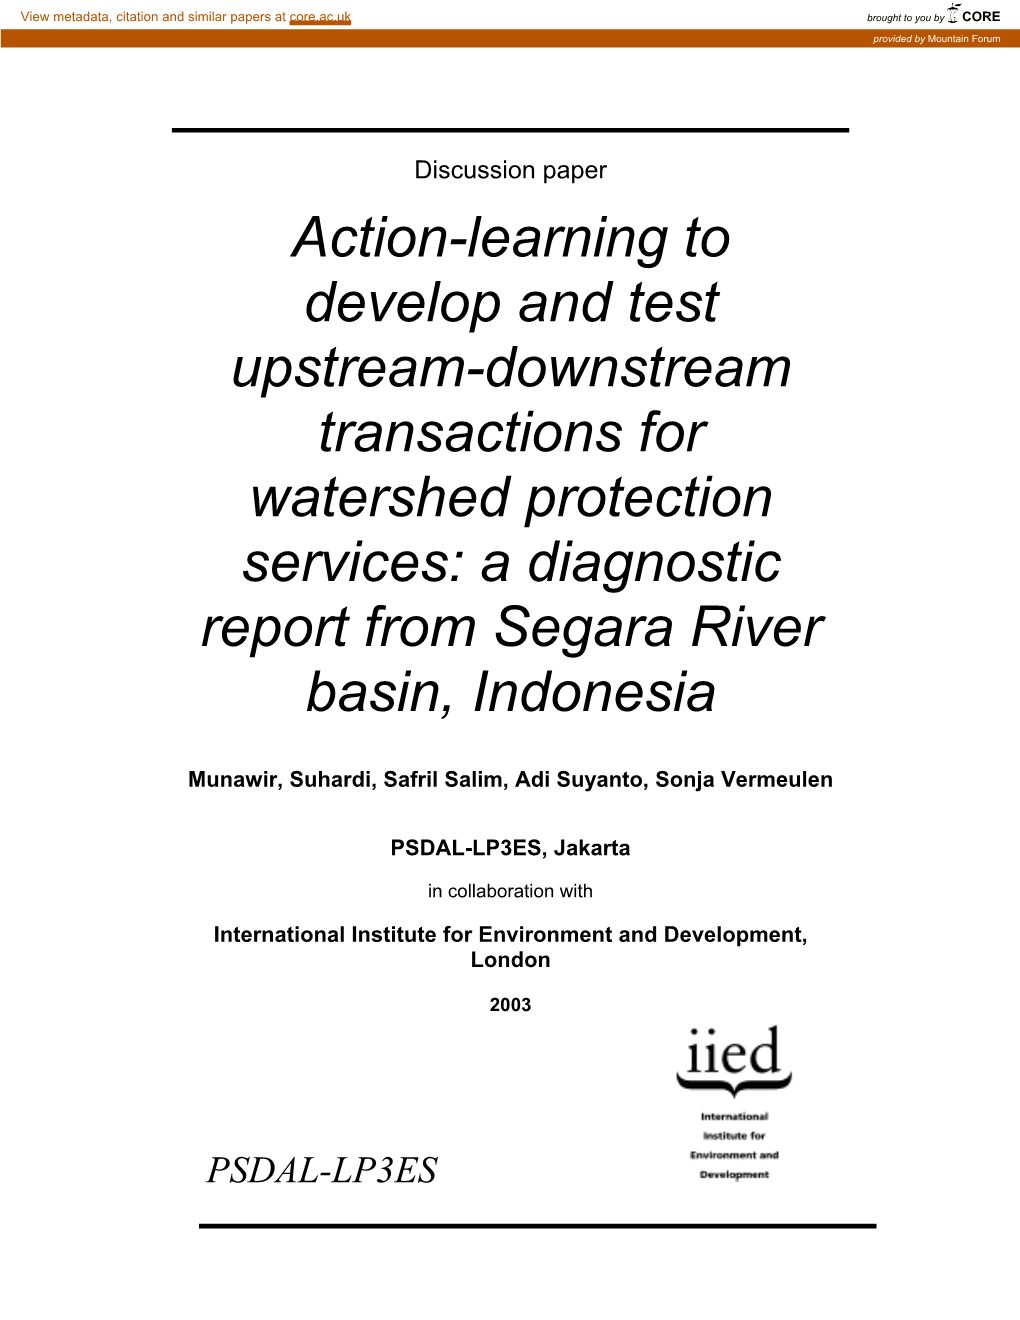 Action-Learning to Develop and Test Upstream-Downstream Transactions for Watershed Protection Services: a Diagnostic Report from Segara River Basin, Indonesia